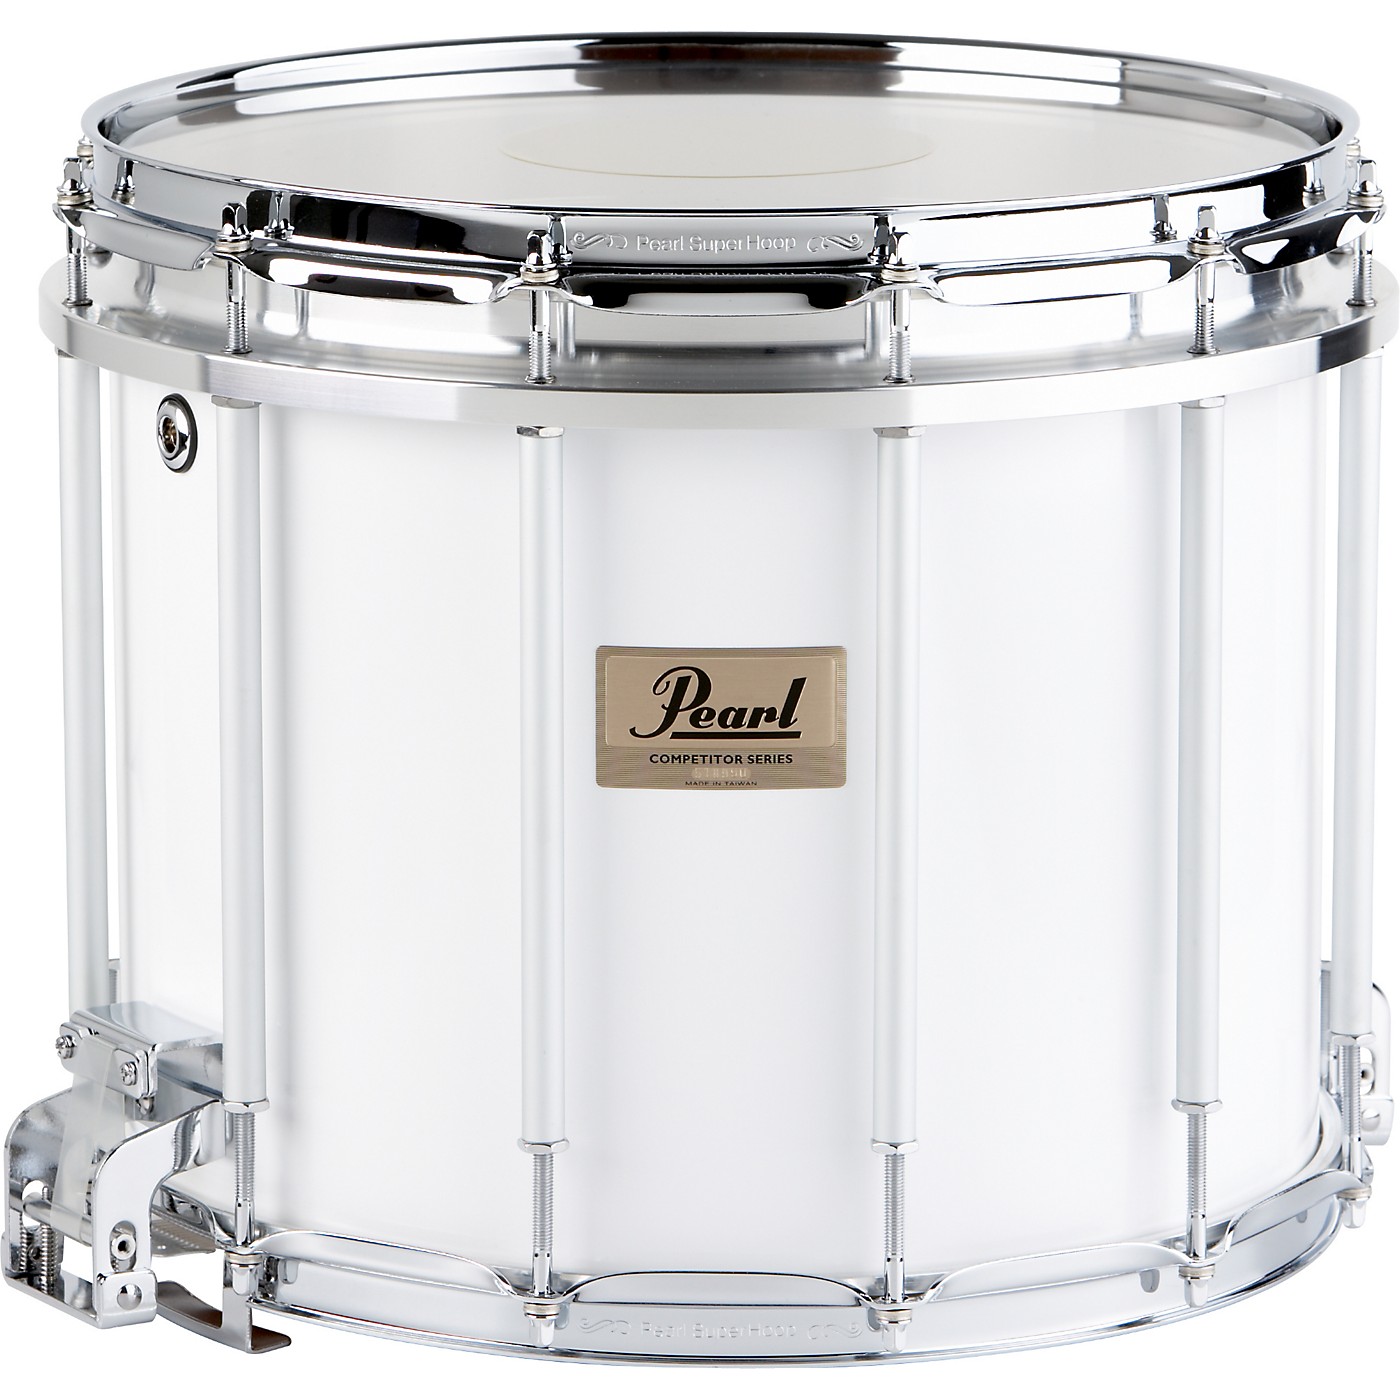 Pearl Competitor High-Tension Marching Snare Drum thumbnail